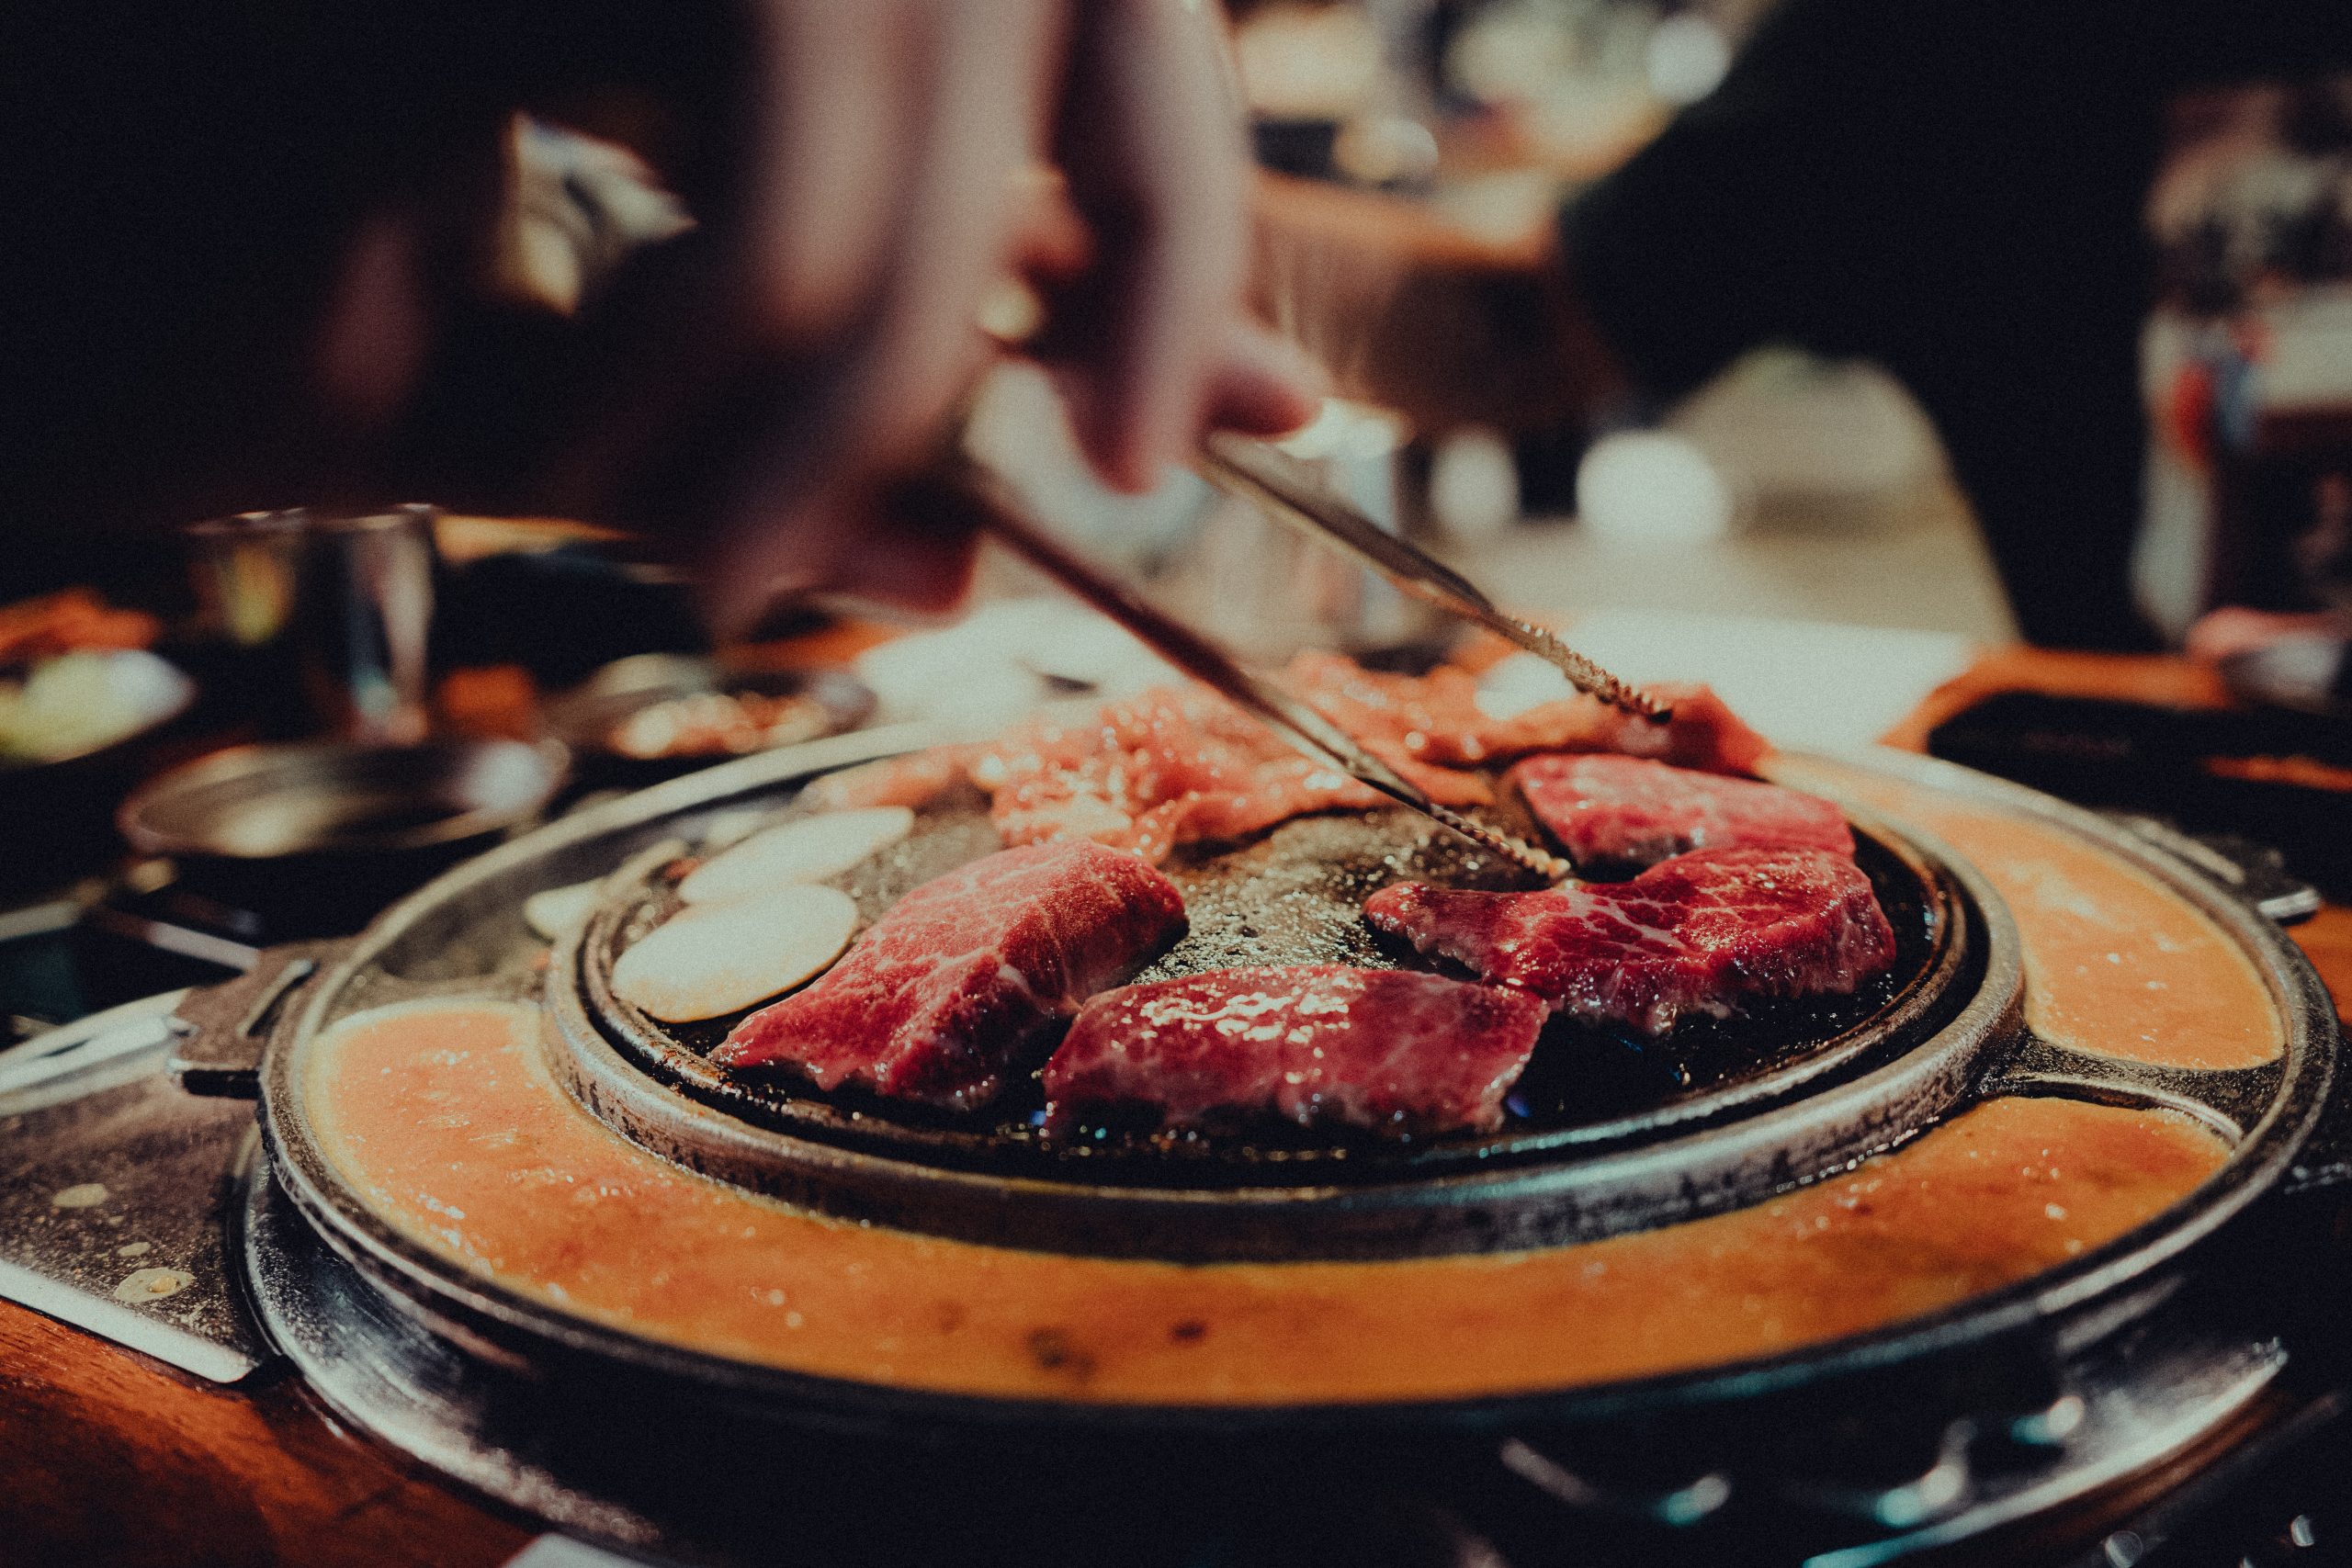 The 18 Finest Korean Barbecue Restaurants in Los Angeles